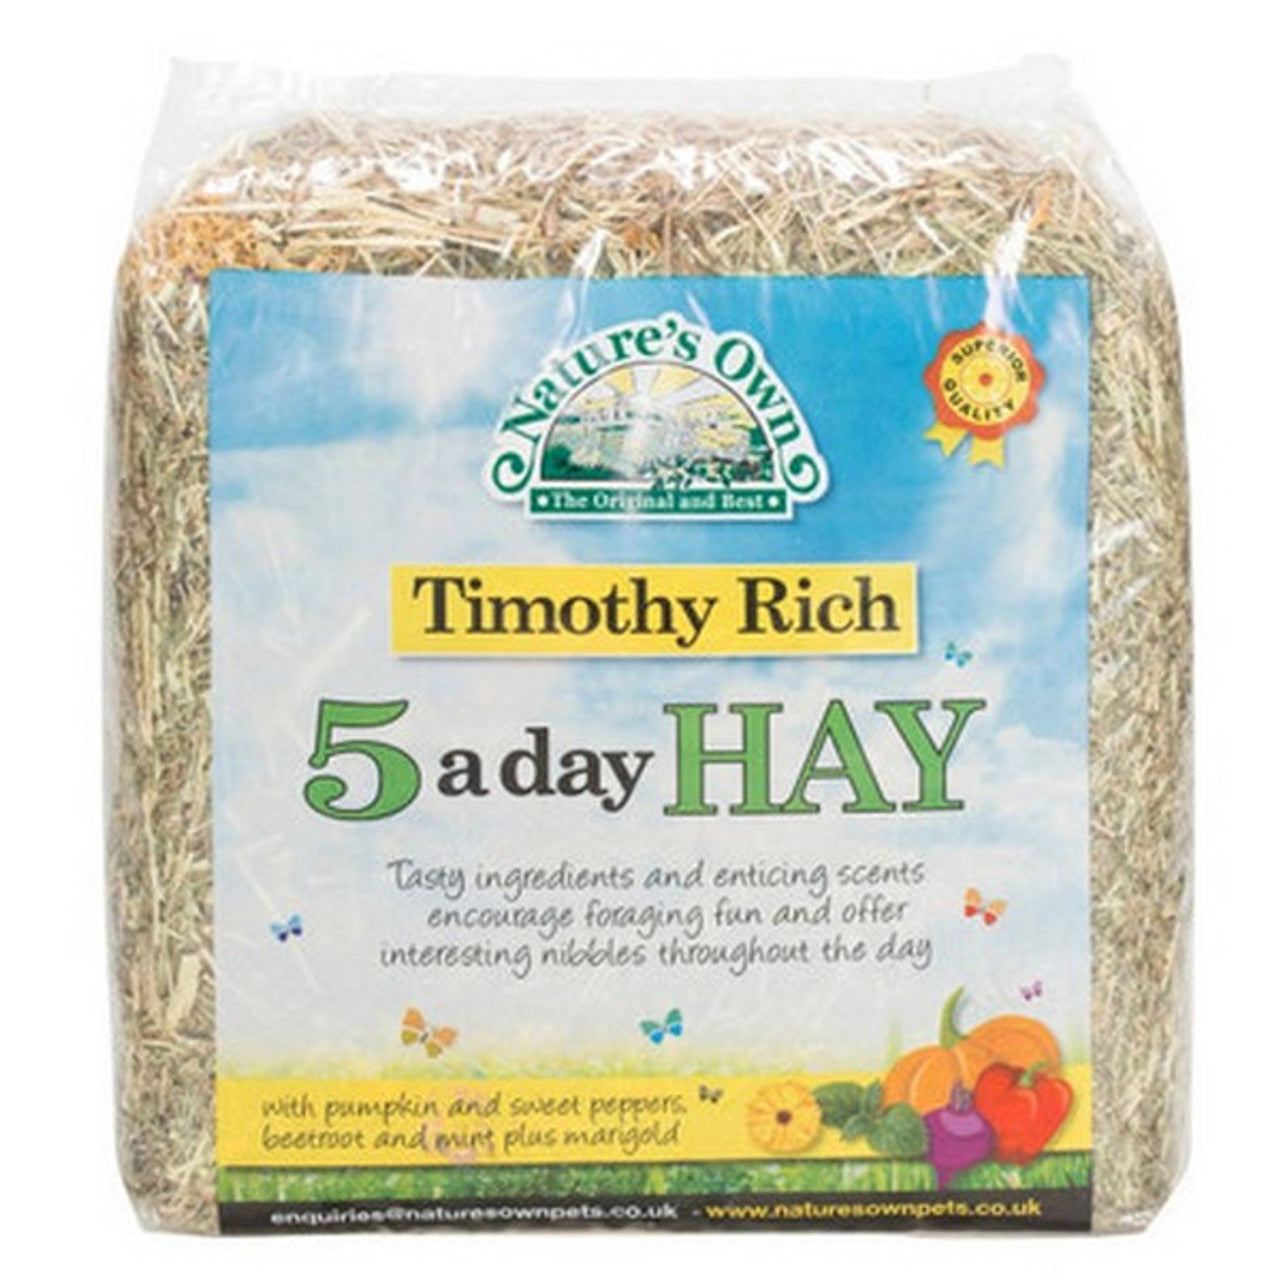 Natures Own Timothy Rich 5 a Day Hay 1kg